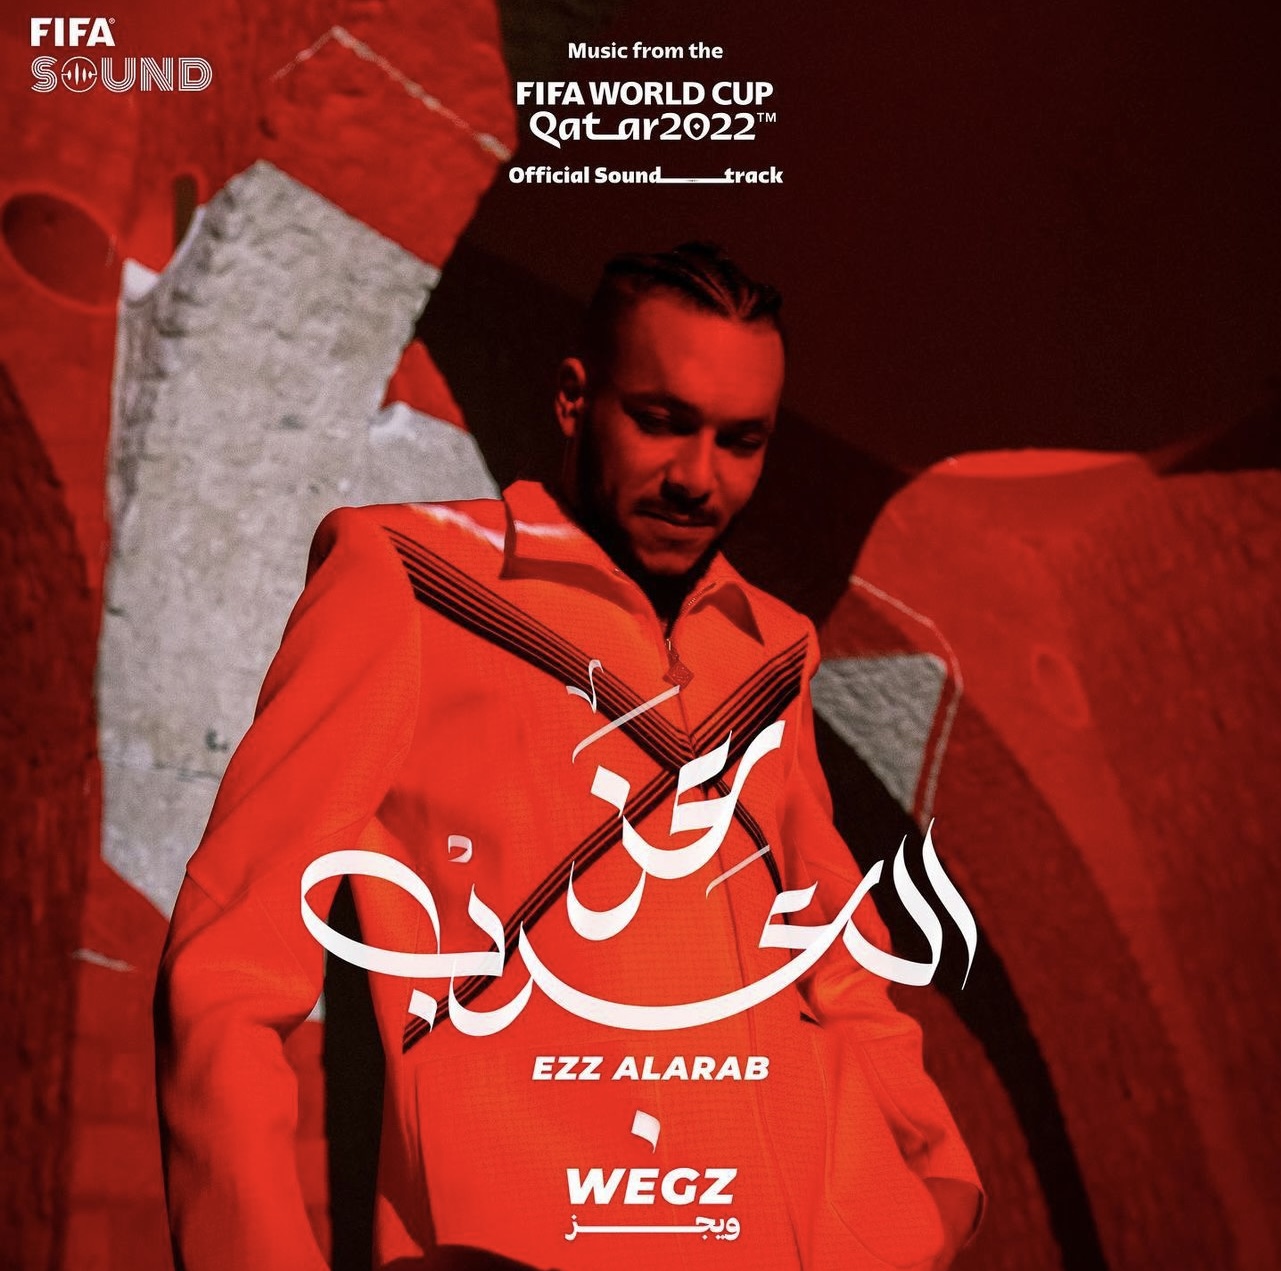 FIFA World Cup Qatar 2022 music cover photo calligraphy.